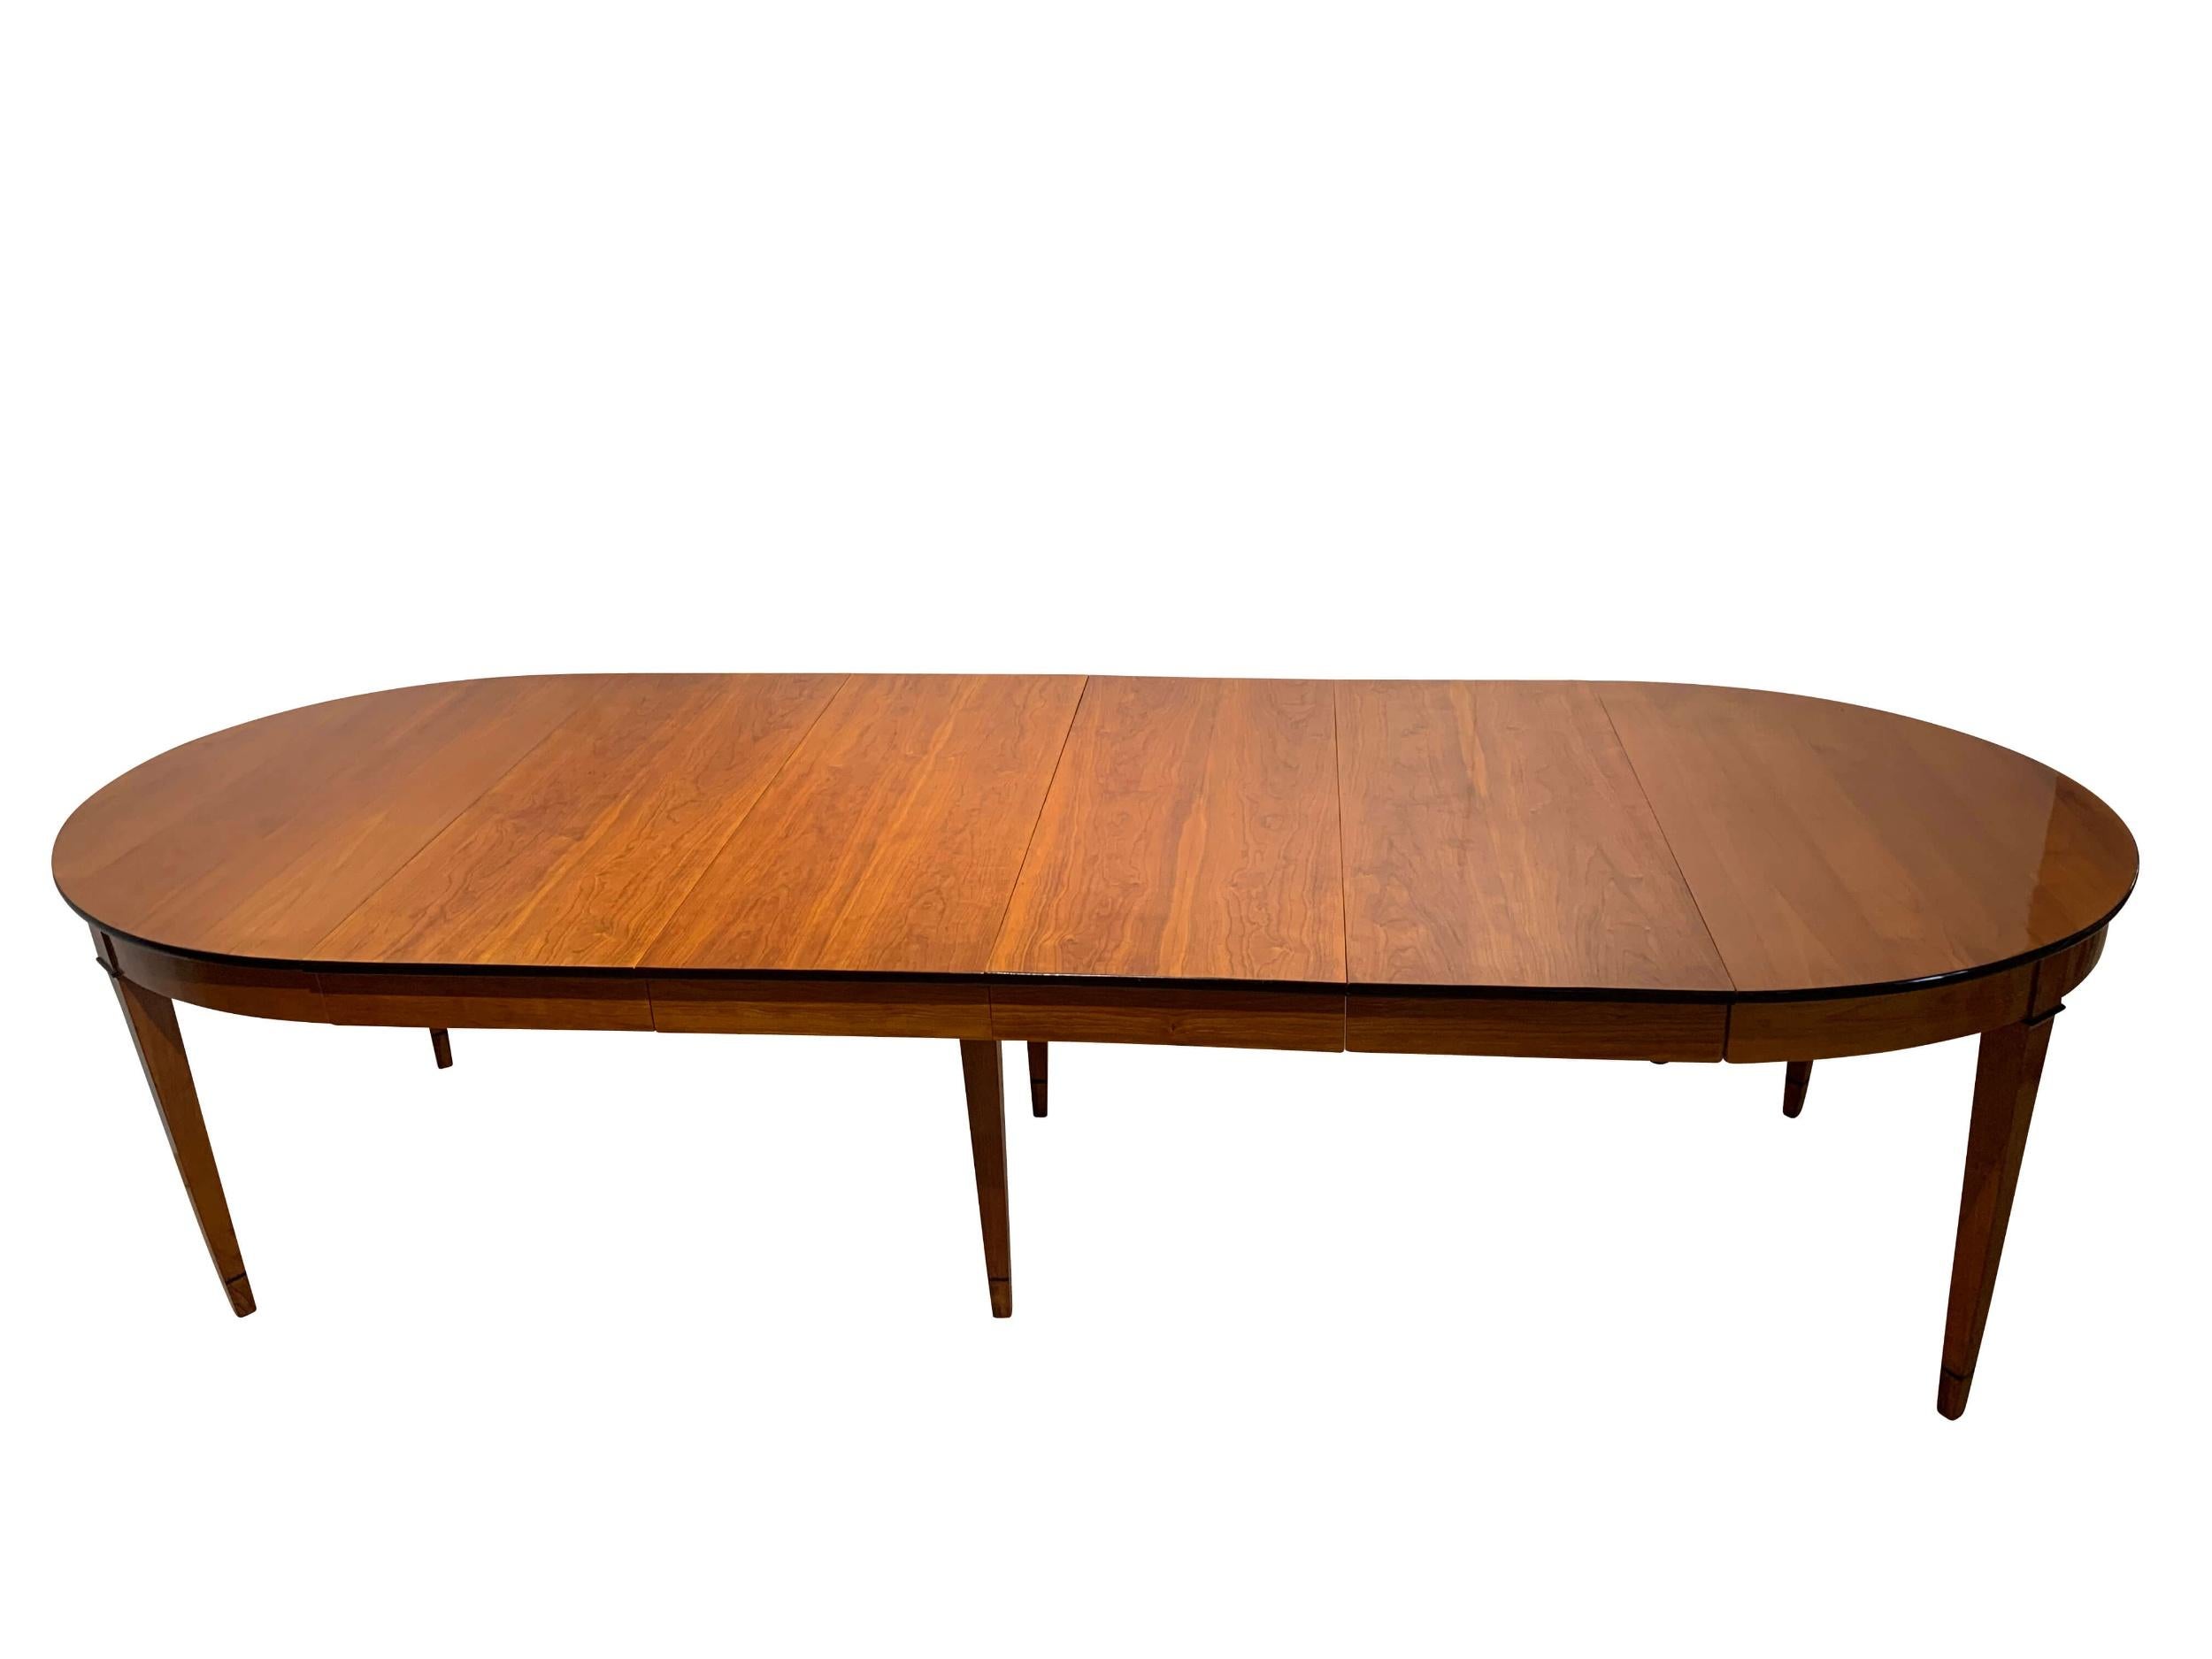 Round expandable dining table, cherry wood, France, Paris circa 1880.

Lovely bright Cherry veneer and solid wood. Refinished and hand-polished with shellac. Straight, conical square legs with ebonized rings. The side of the plate has been